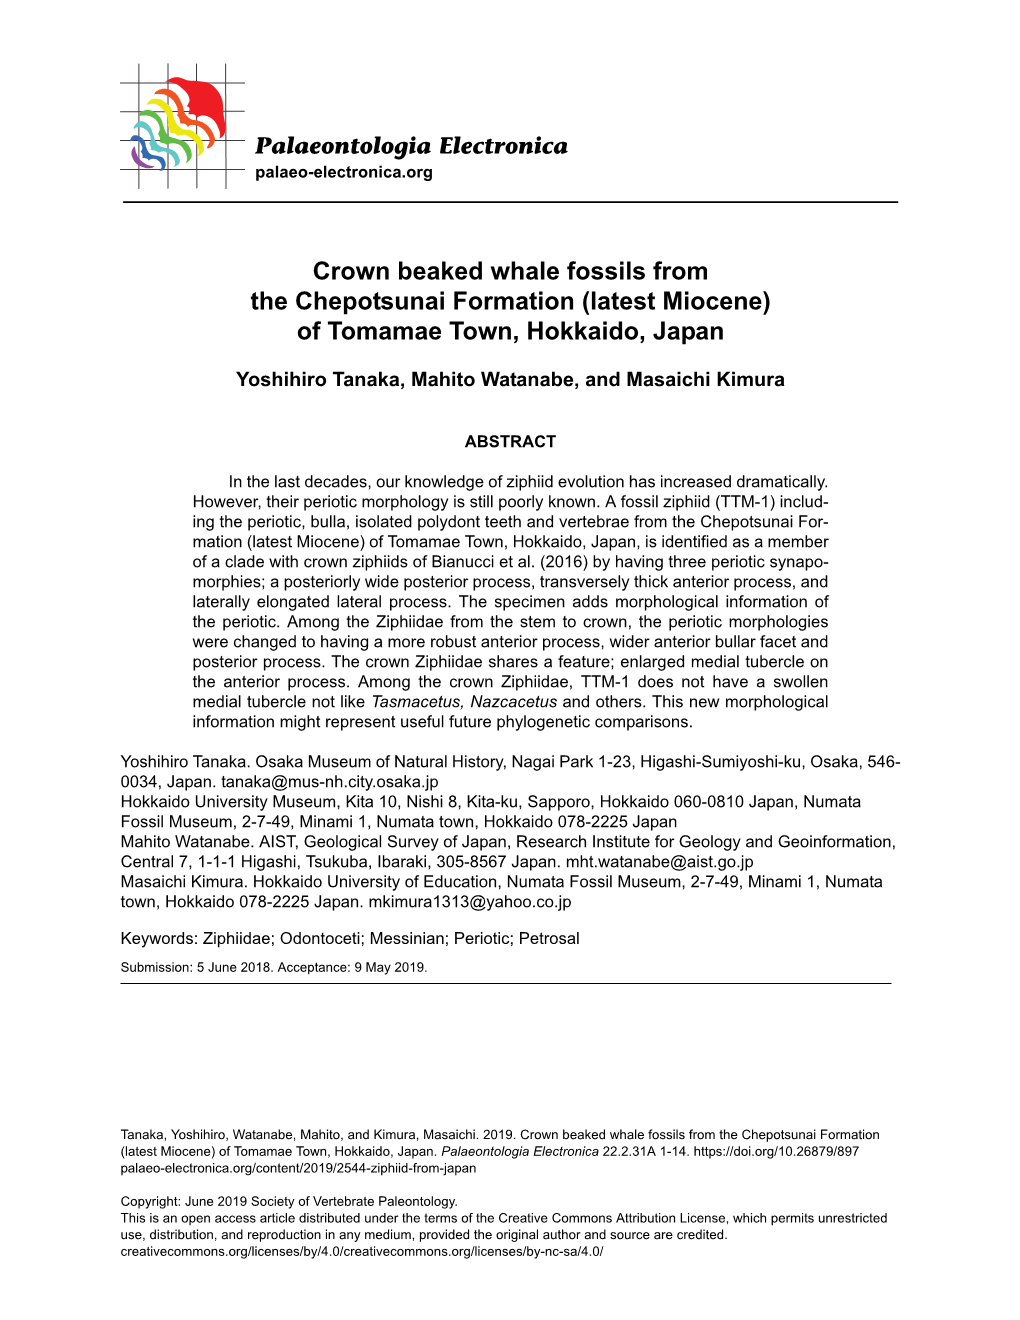 Crown Beaked Whale Fossils from the Chepotsunai Formation (Latest Miocene) of Tomamae Town, Hokkaido, Japan